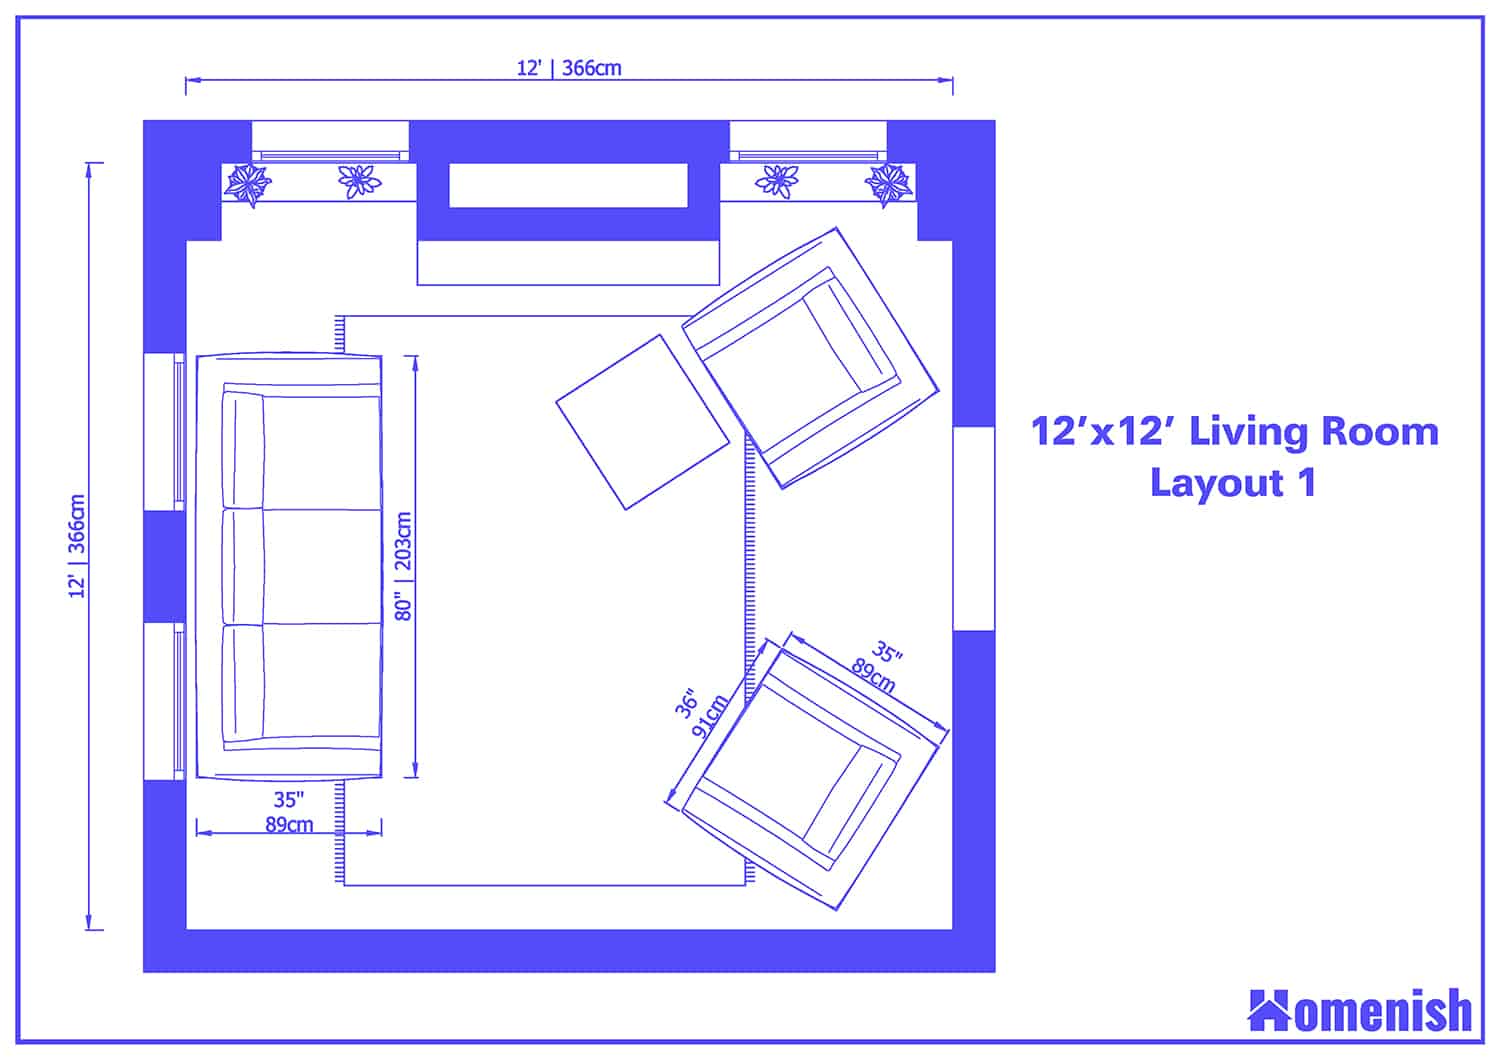 10x12 living room layout